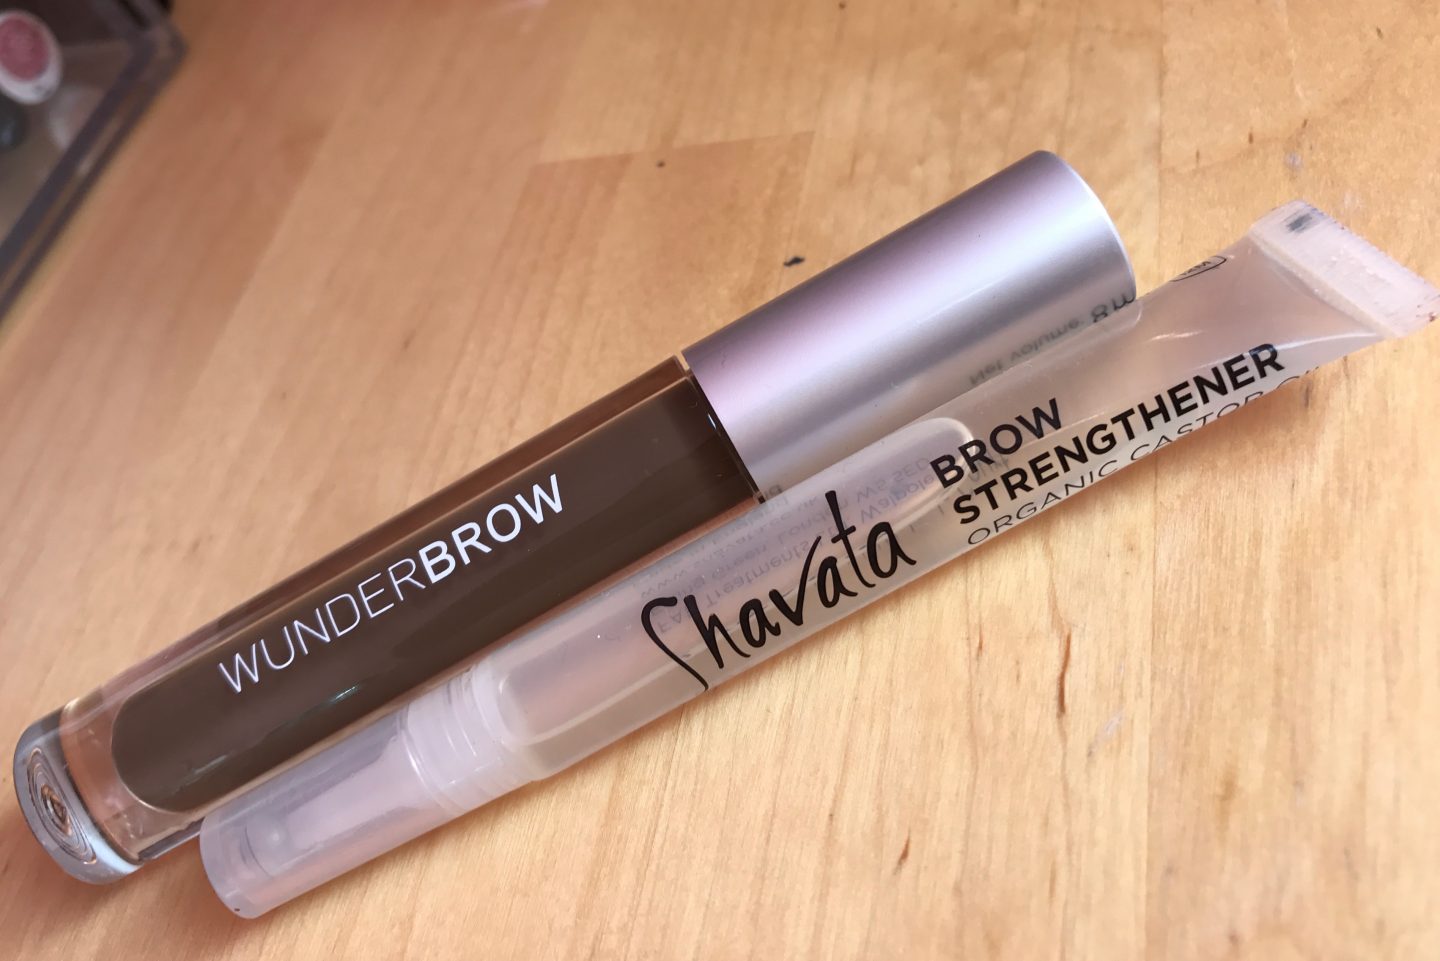 Wunderbrow and Shavata Brow Oil